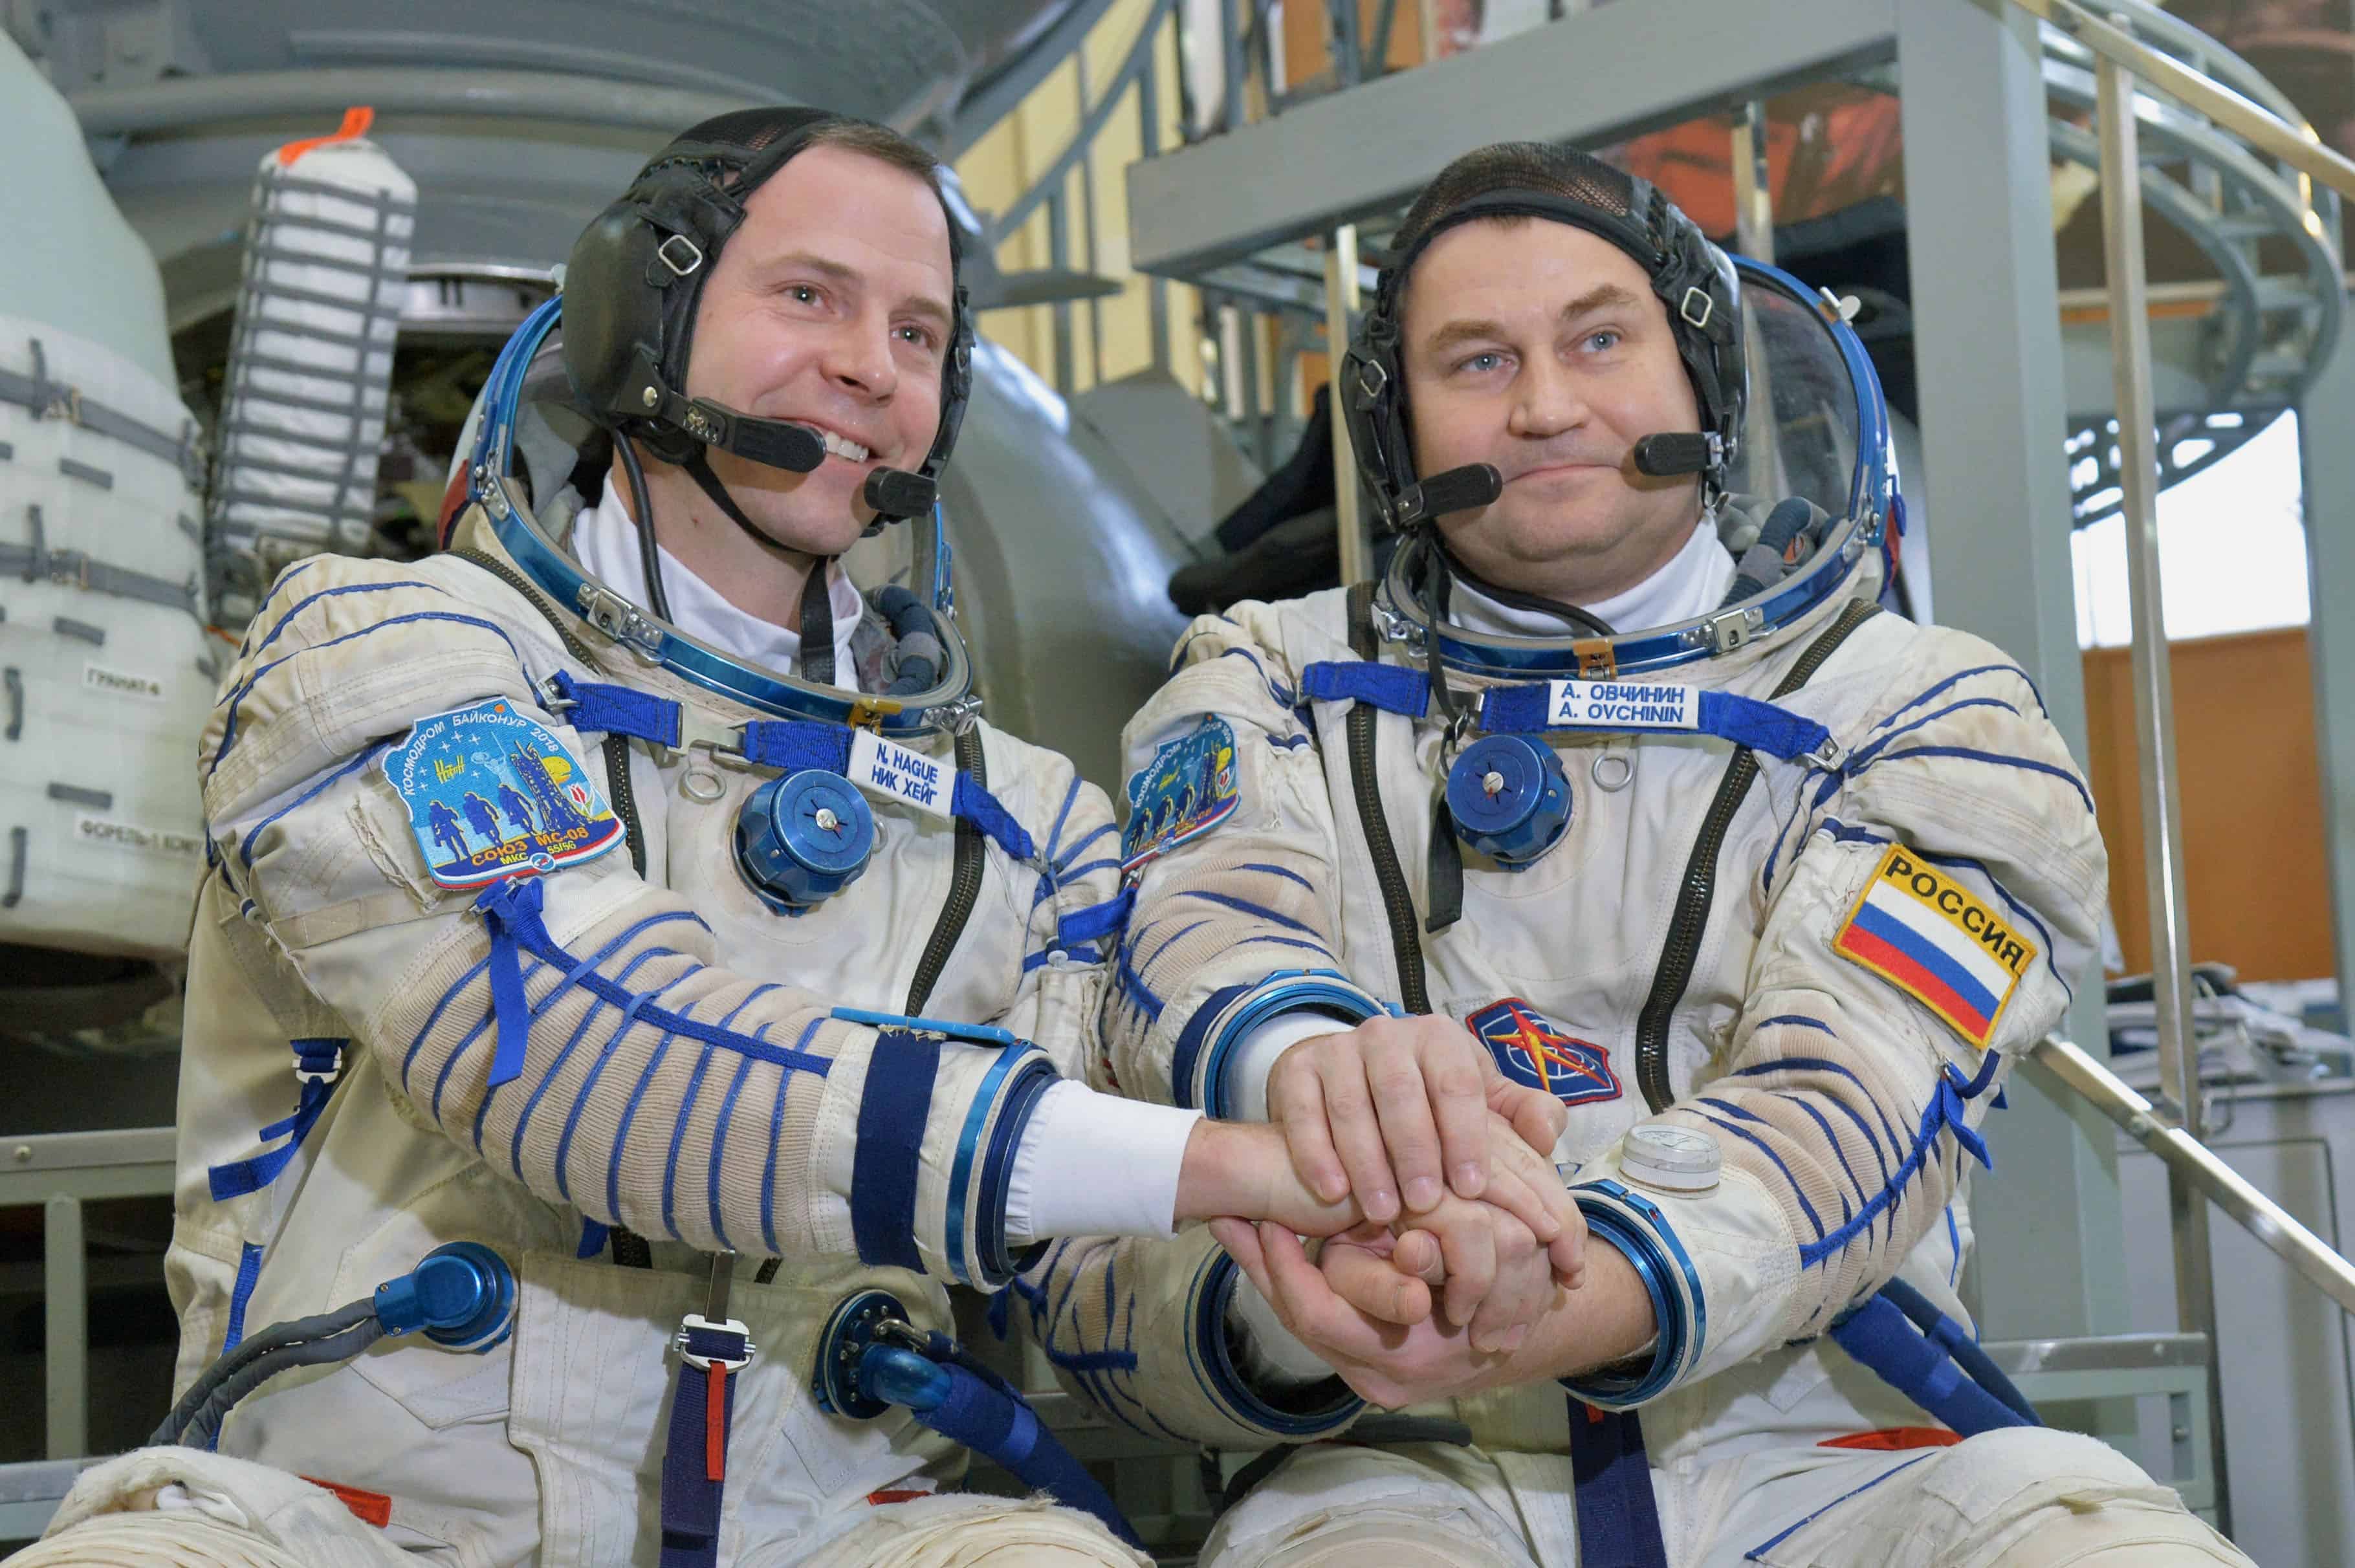 At the Gagarin Cosmonaut Training Center in Star City, Russia, Expedition 55 backup crew members Nick Hague of NASA (left) and Alexey Ovchinin of Roscosmos (right) pose for pictures during a day of qualification exams Feb. 20, 2018. Credit: Wikimedia Commons.